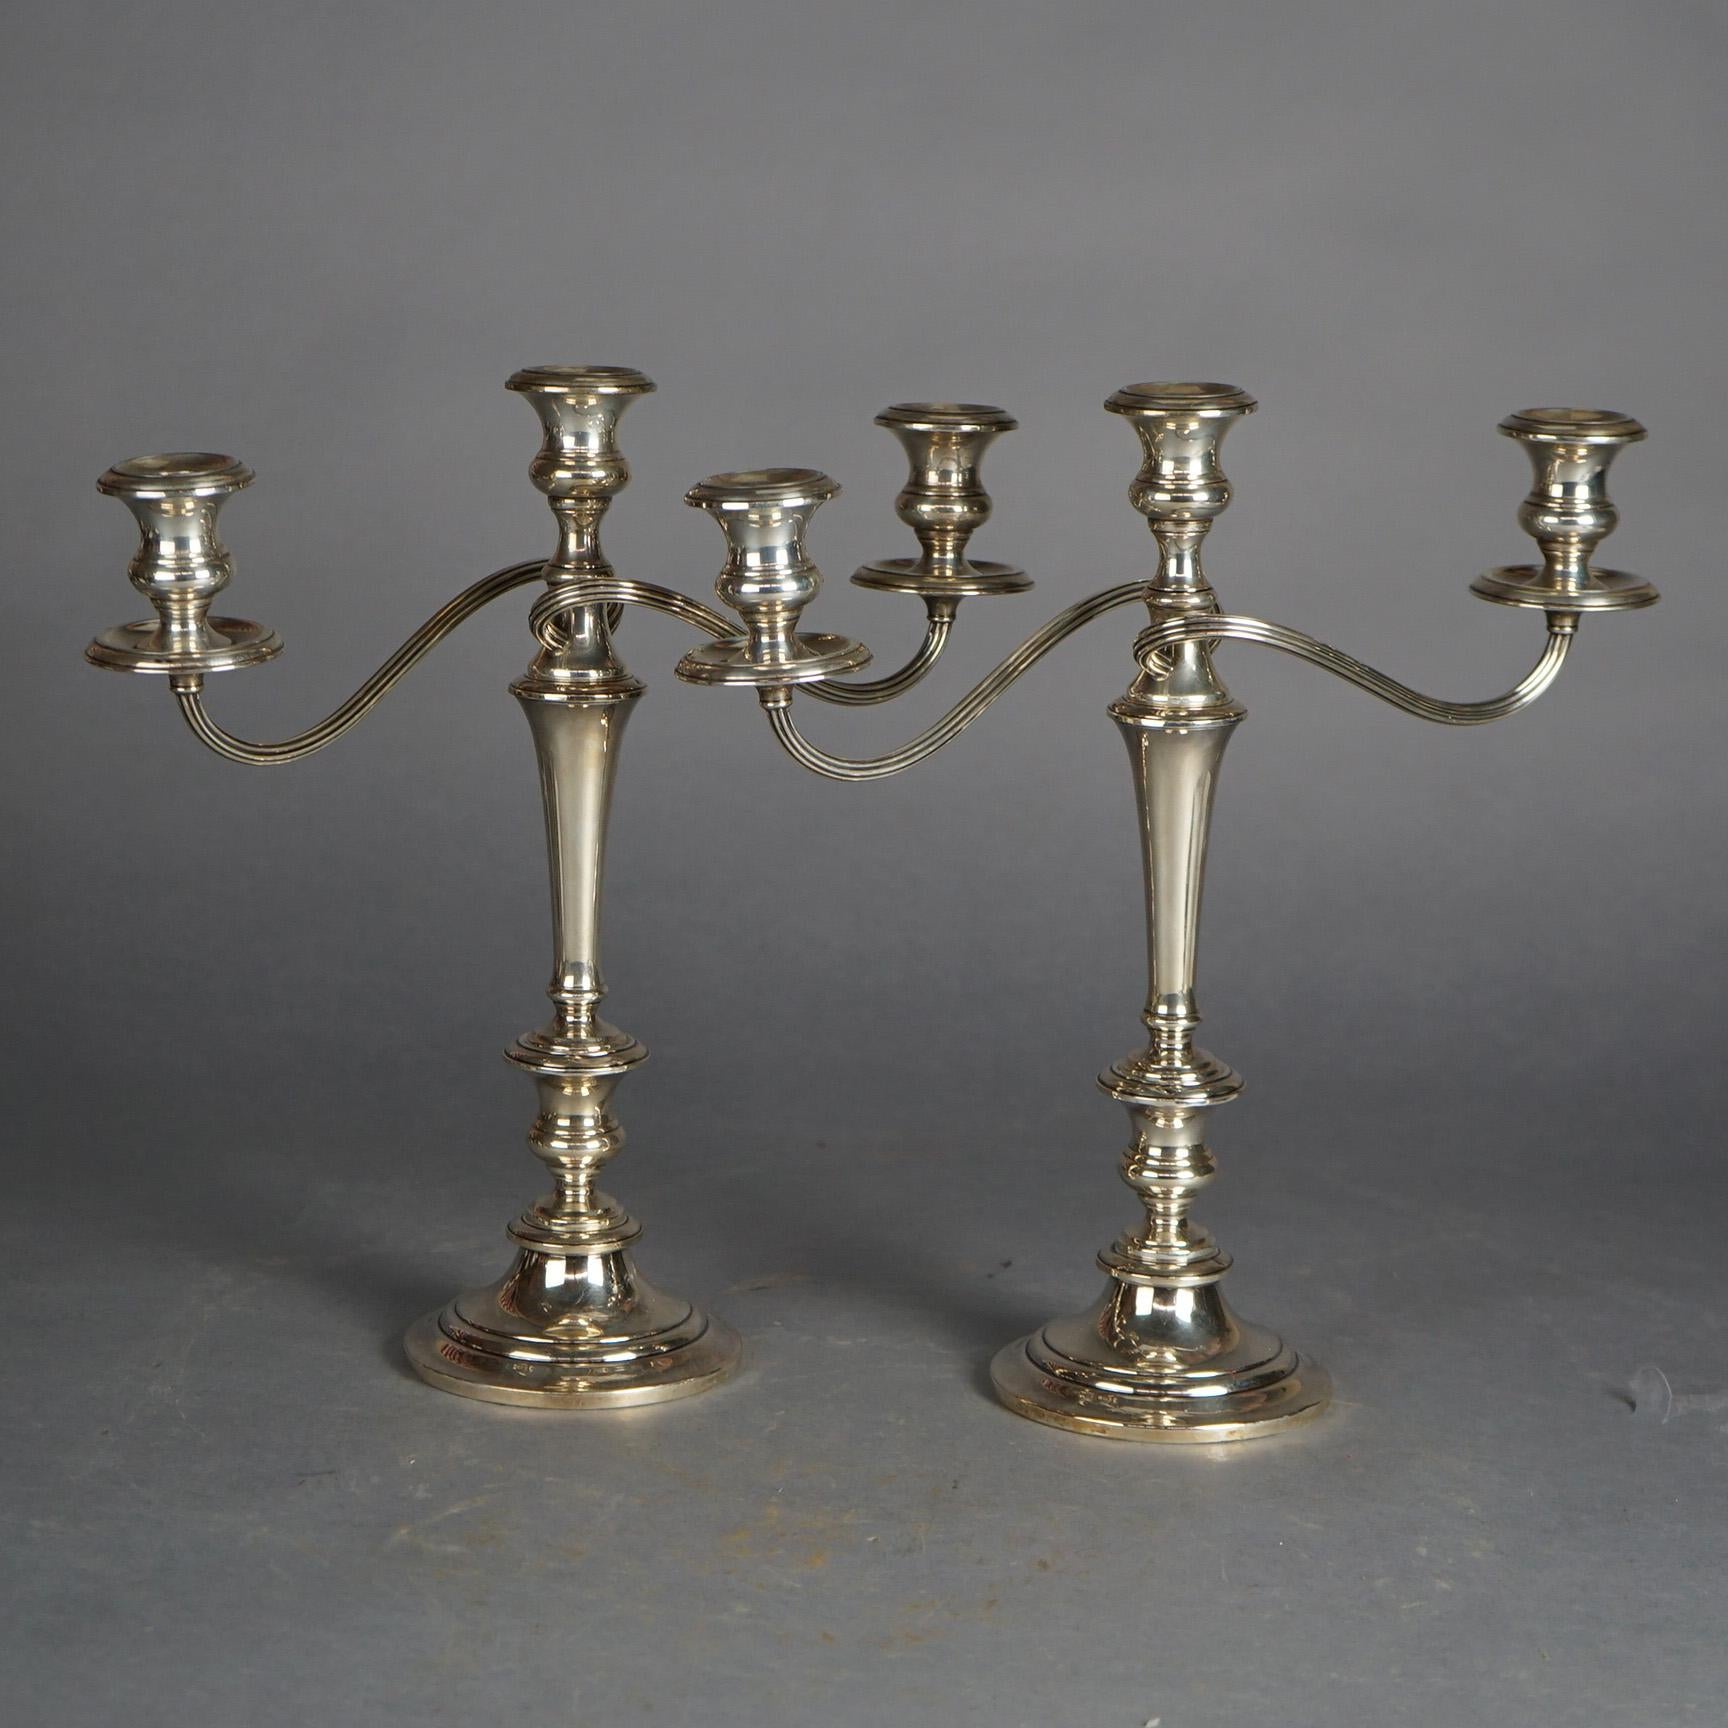 Pair Sterling Silver Three-Light Candelabra with Scroll Form Arms, C1920

Measures- 14.5''H x 14''W x 4''D